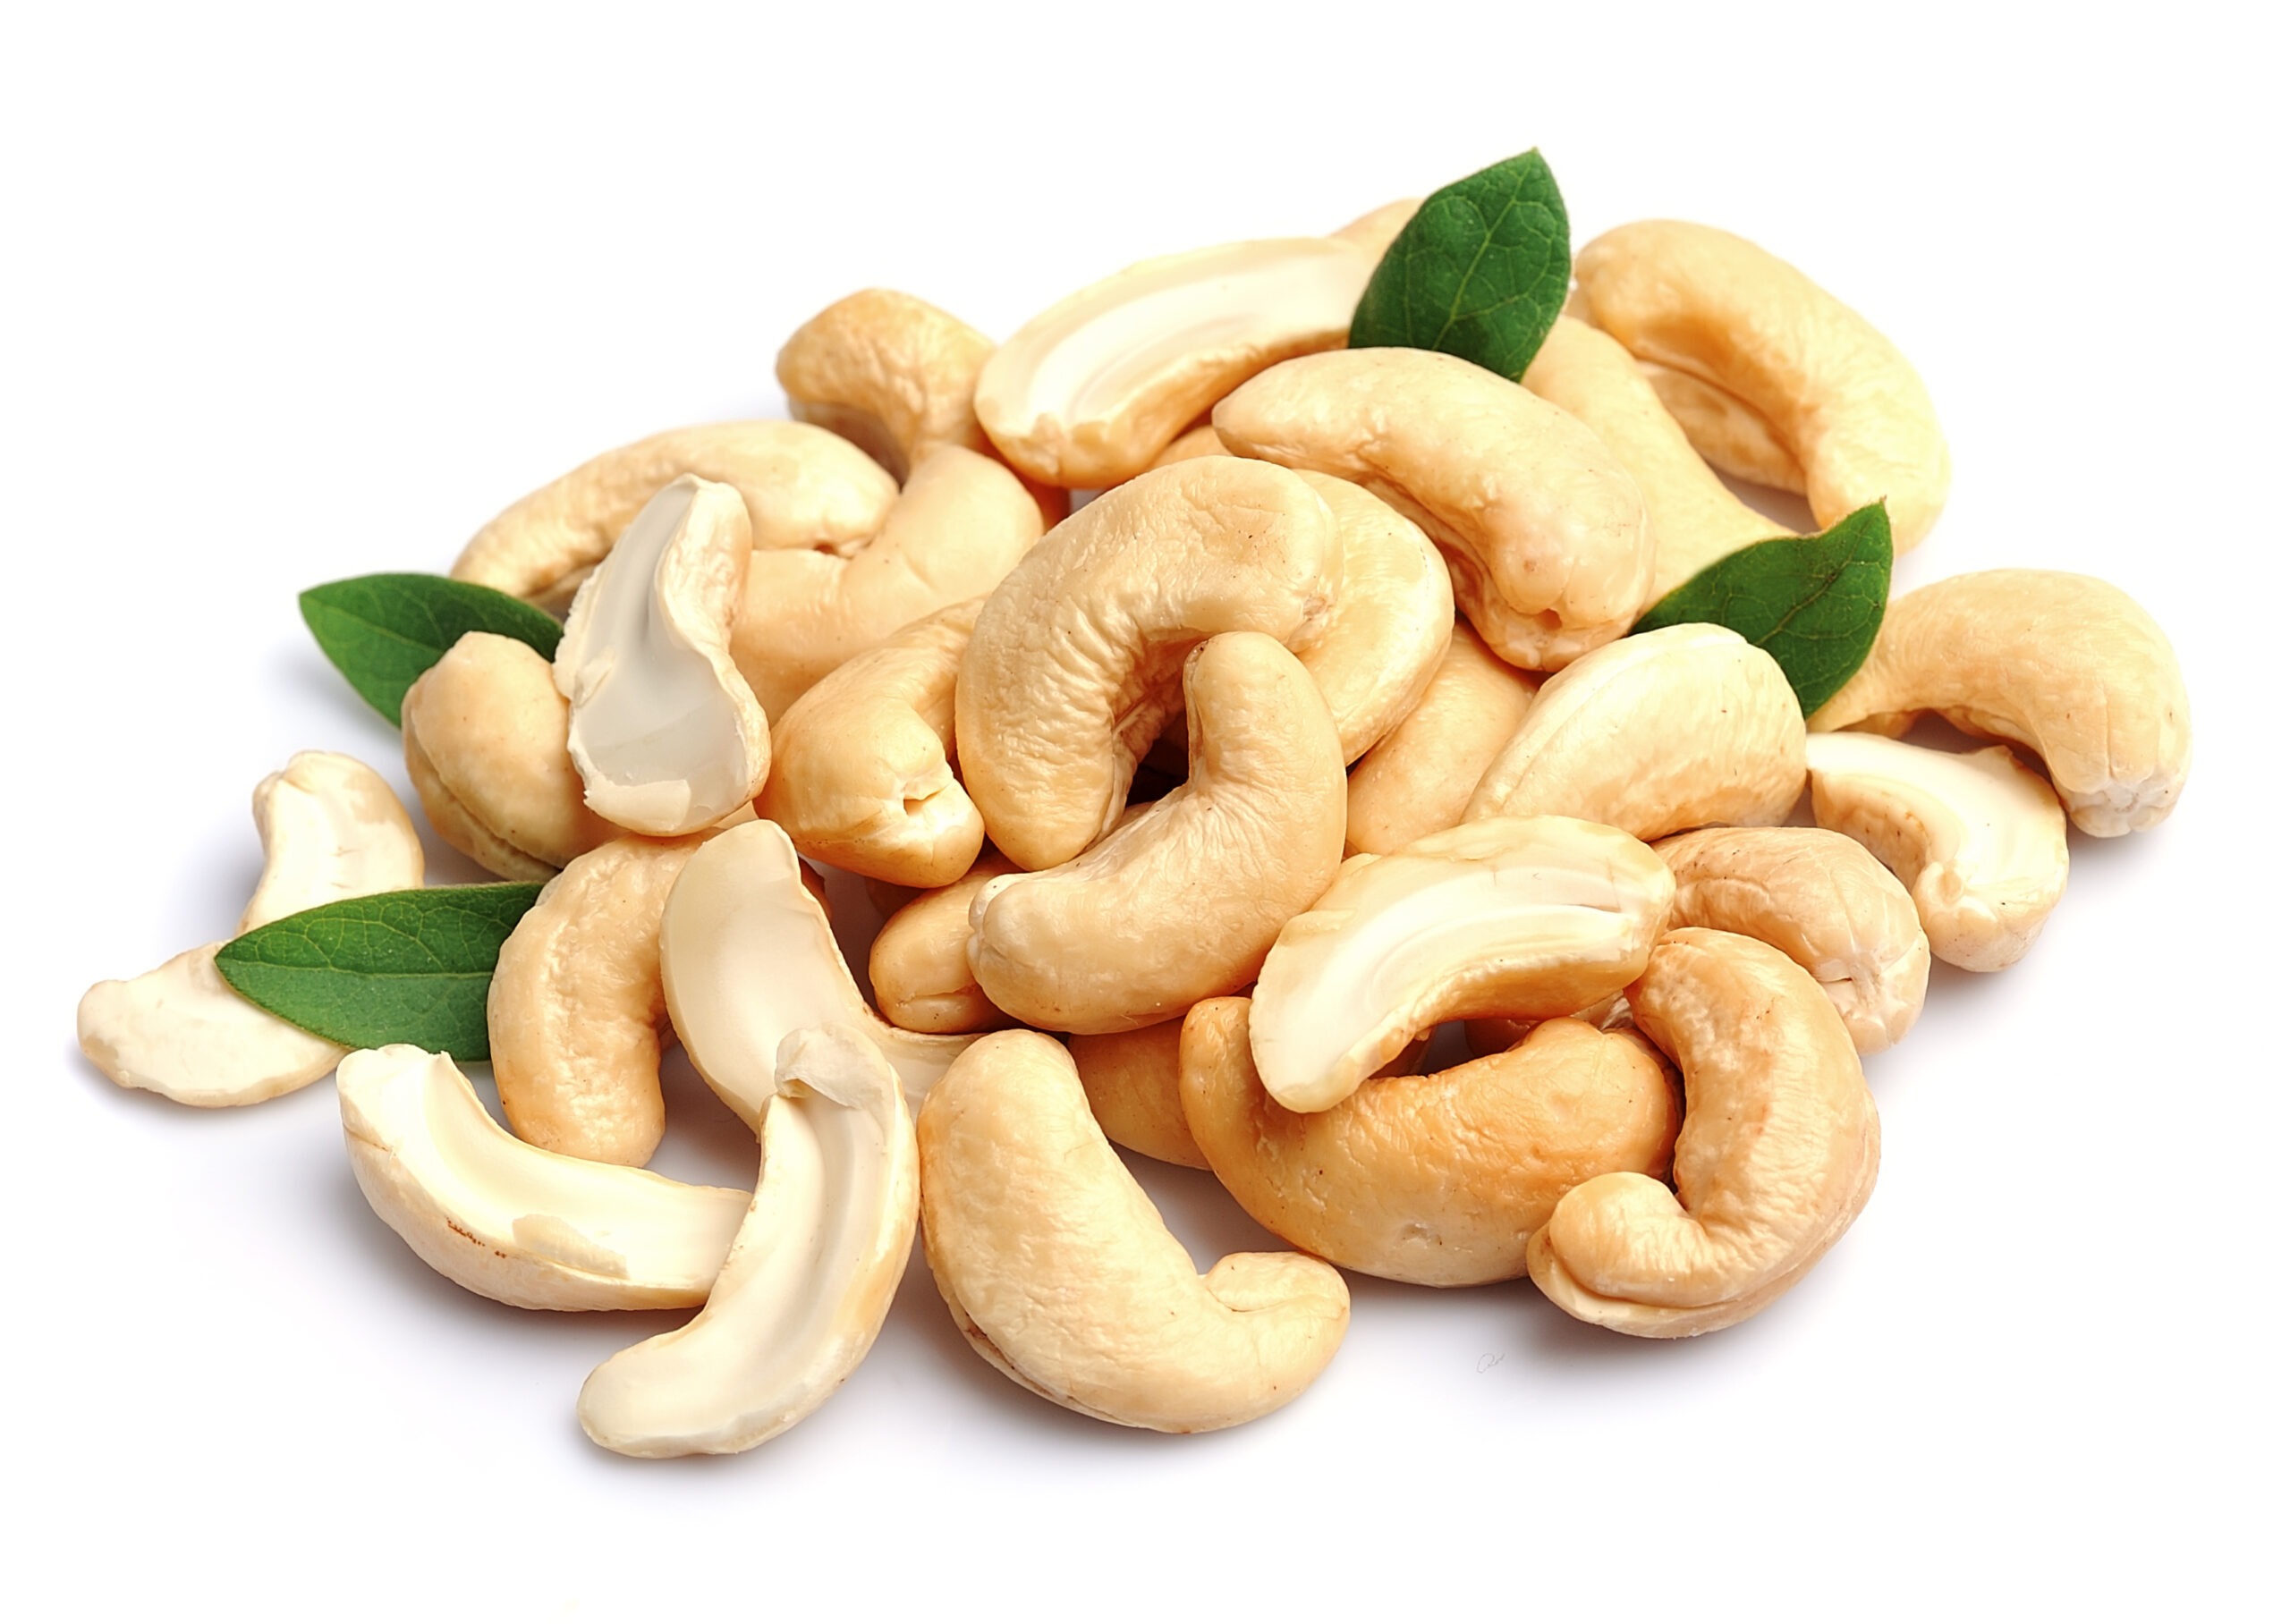 Satisfy your cravings with our premium, locally sourced cashew nuts.